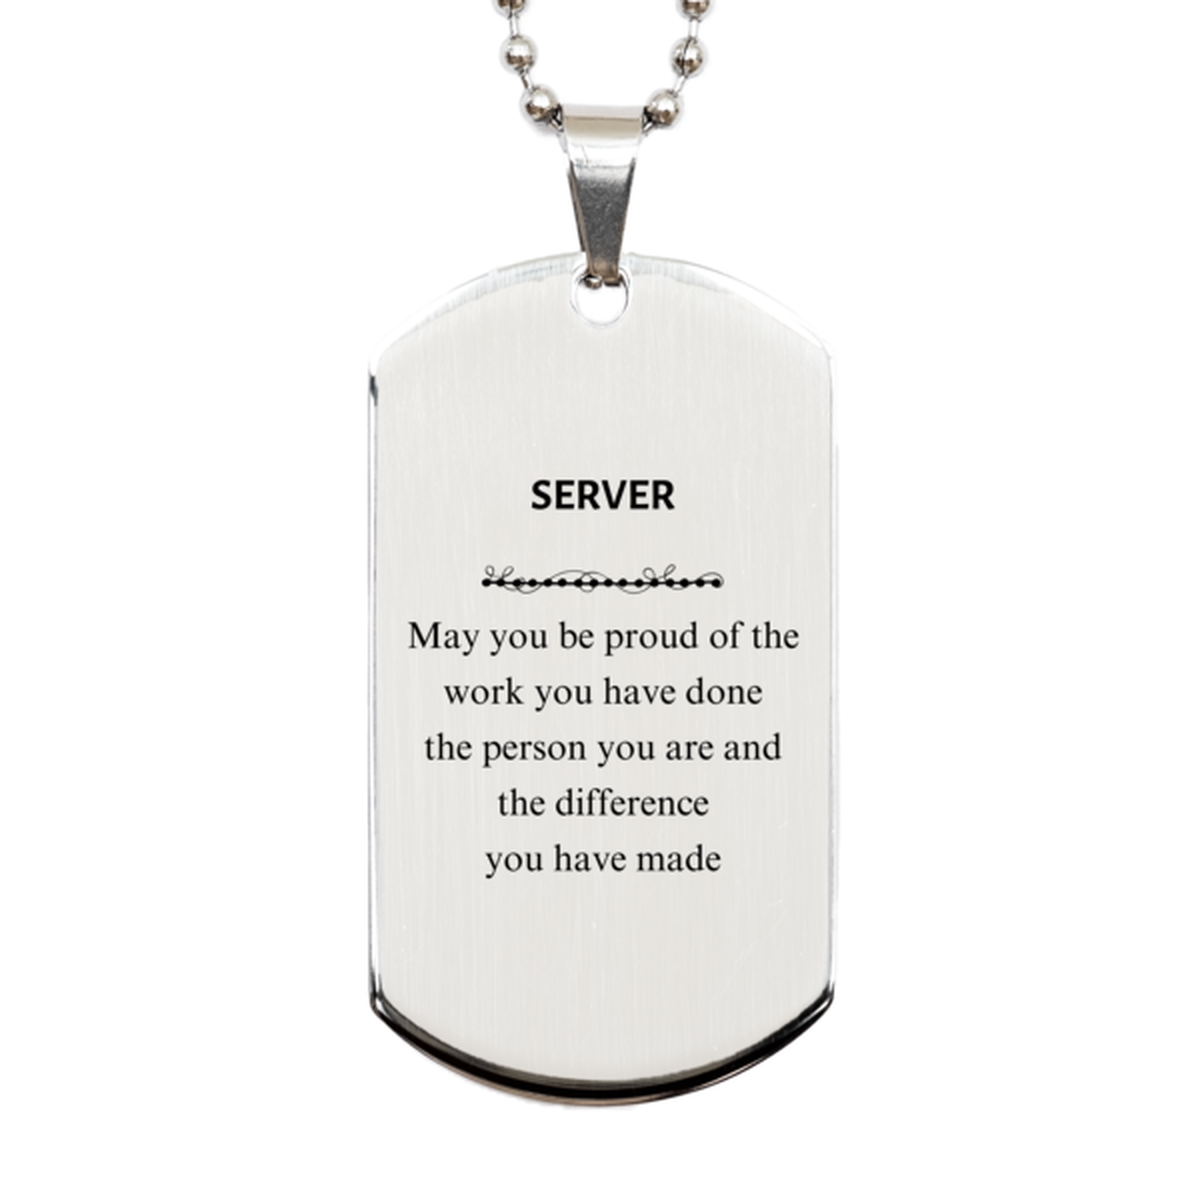 Server May you be proud of the work you have done, Retirement Server Silver Dog Tag for Colleague Appreciation Gifts Amazing for Server